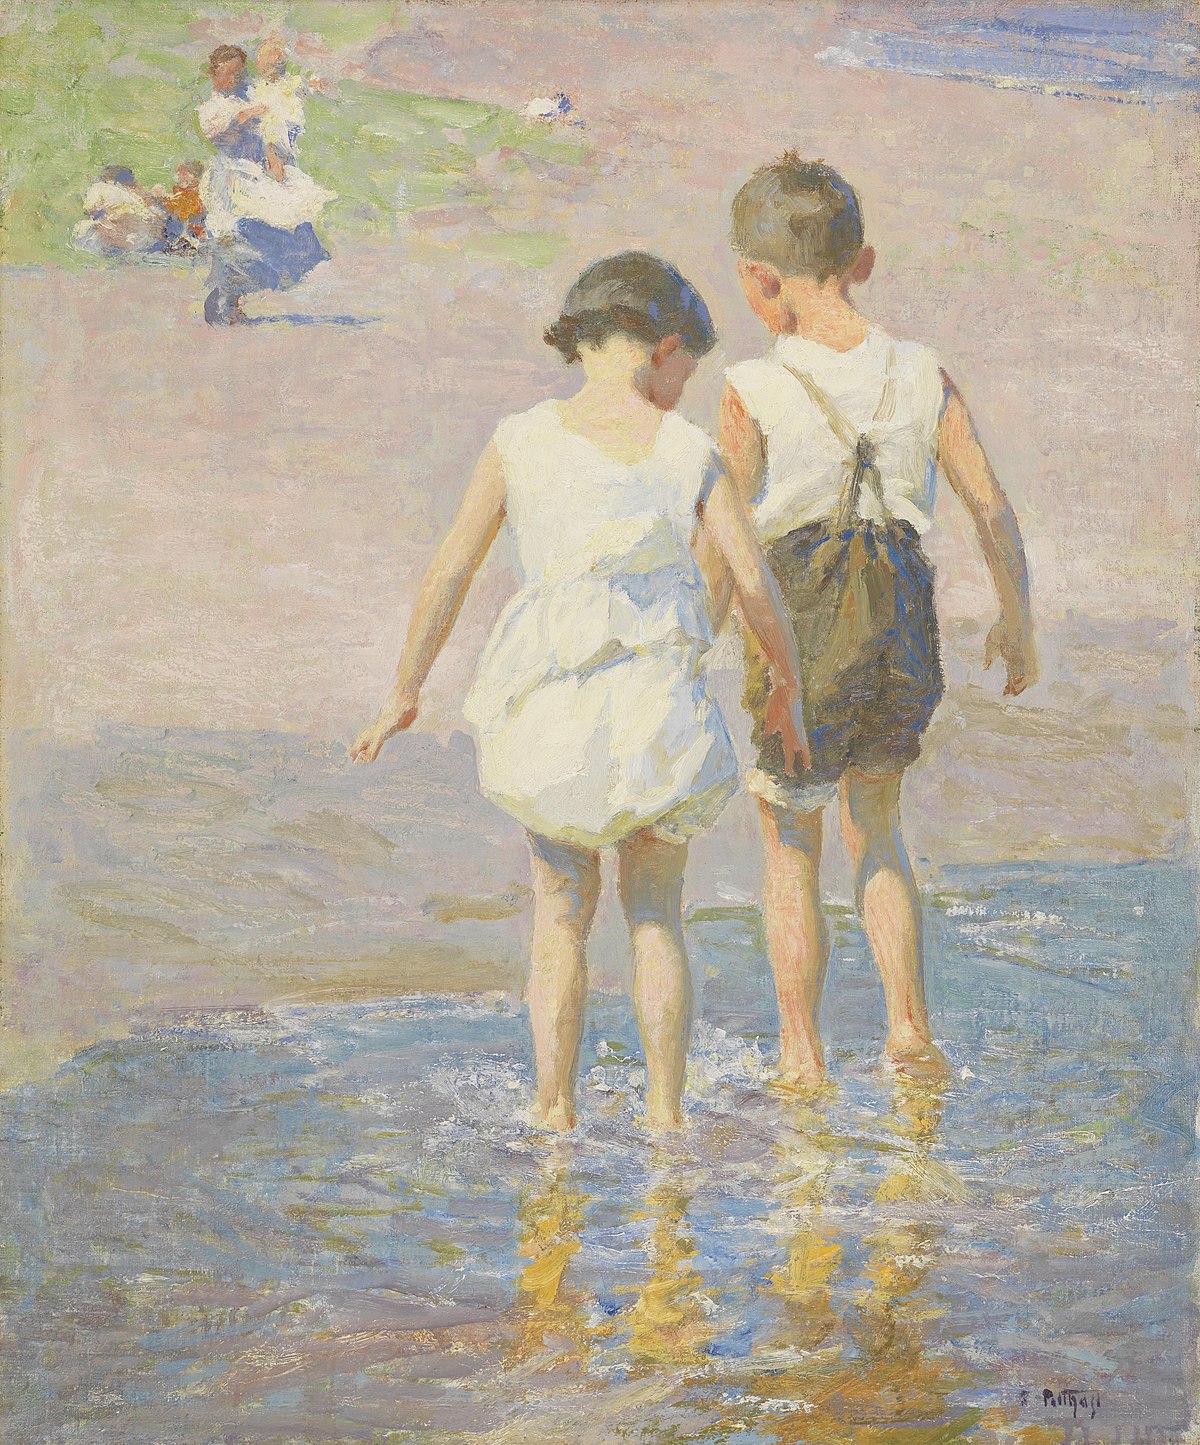 File:Edward Henry Potthast - Brother and Sister (c. 1915).jpg - Wikimedia C...